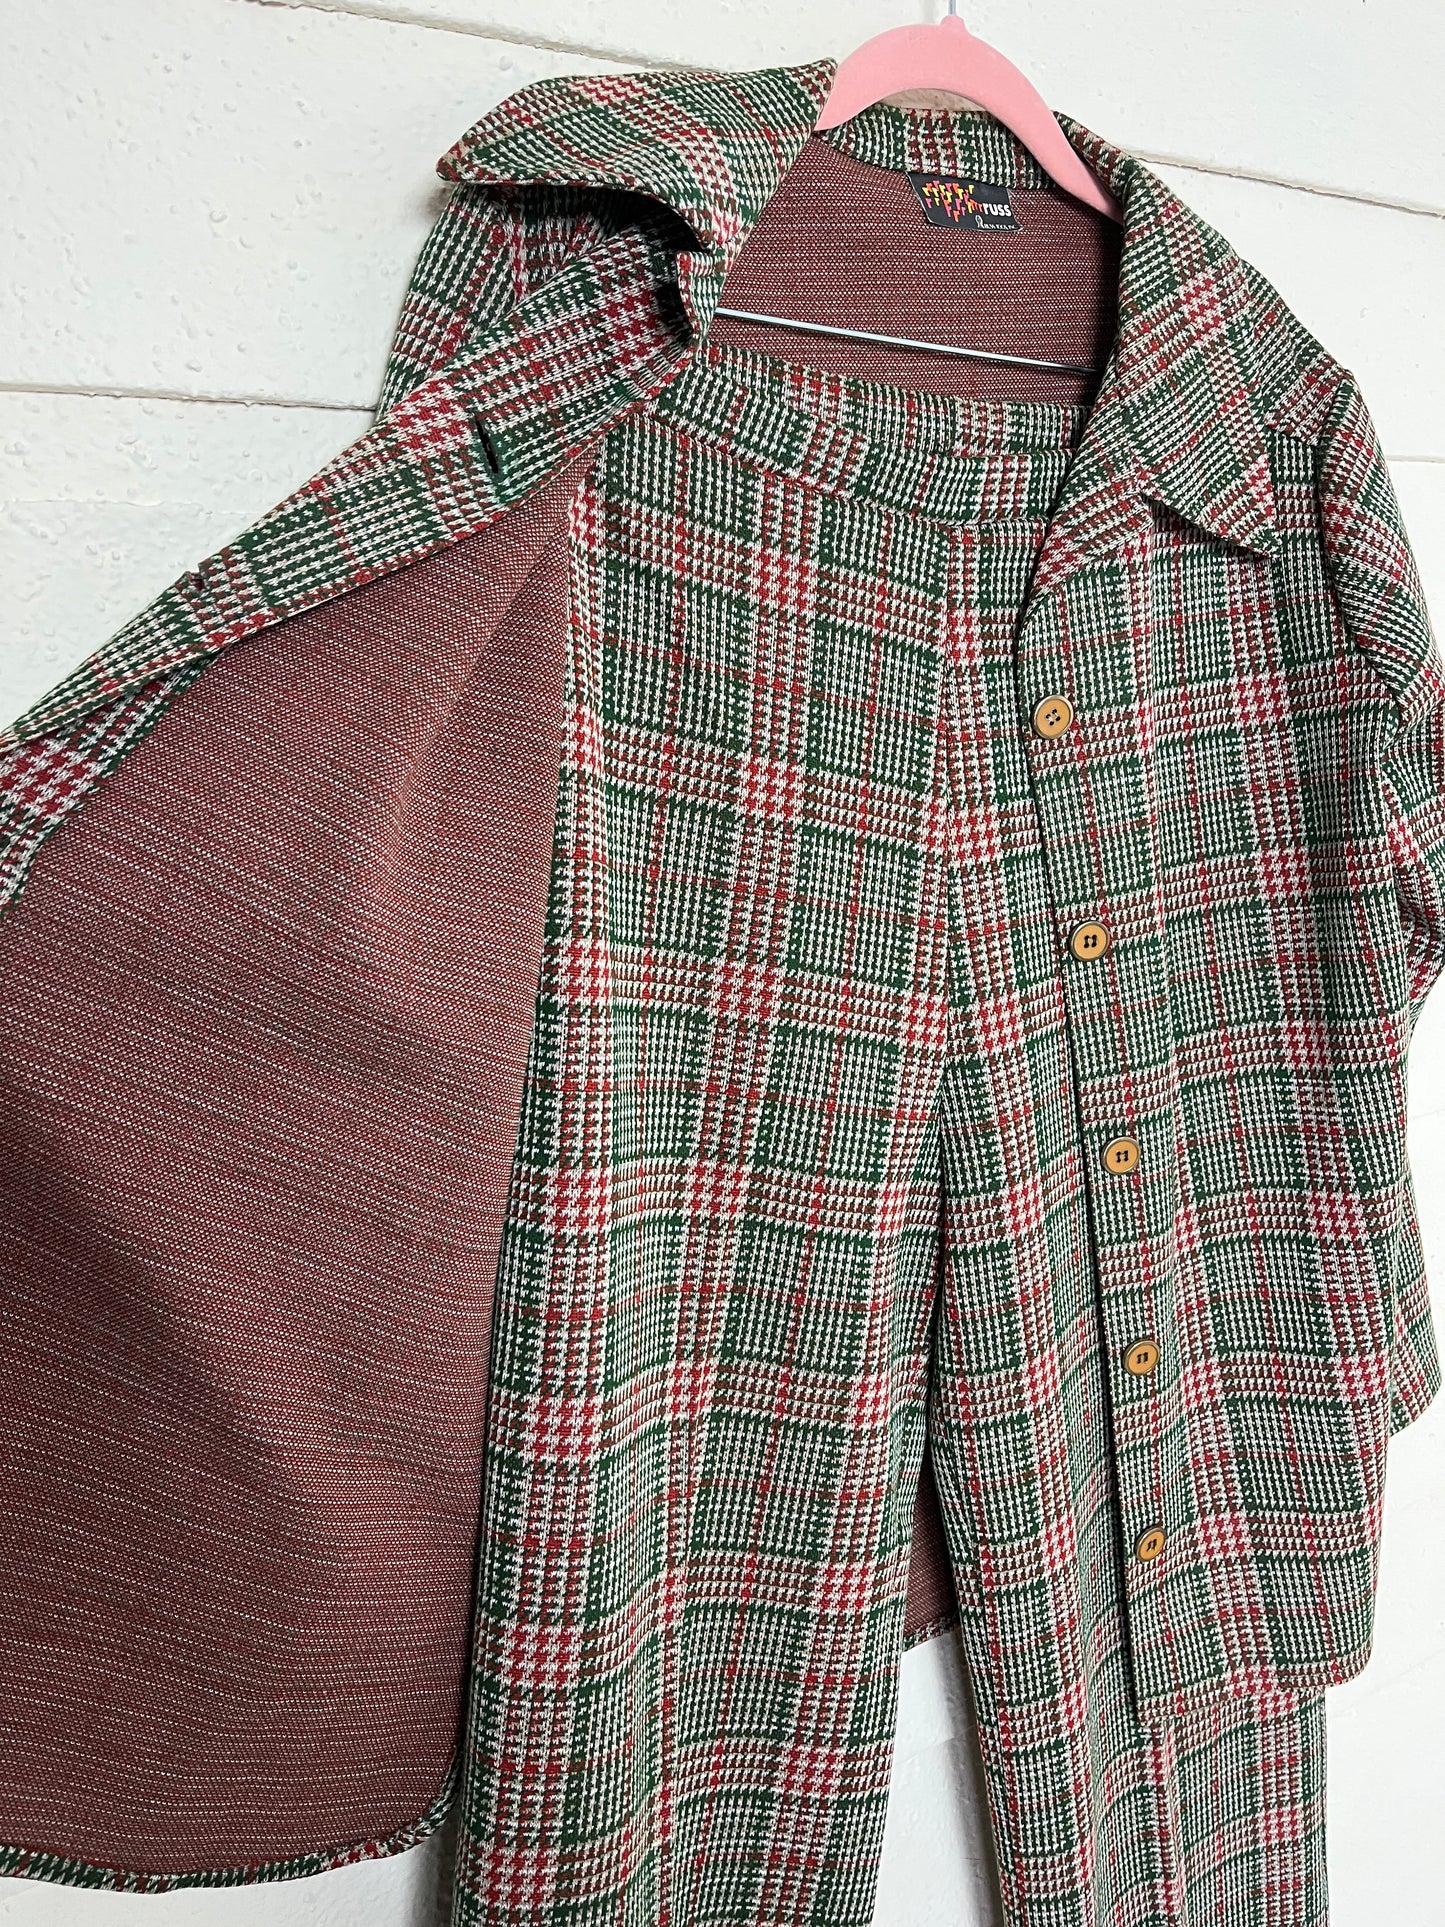 1970s RRRUSS PLAID CHORE COAT AND ELASTIC WAIST PANT SET GREEN AND RED - size med to large